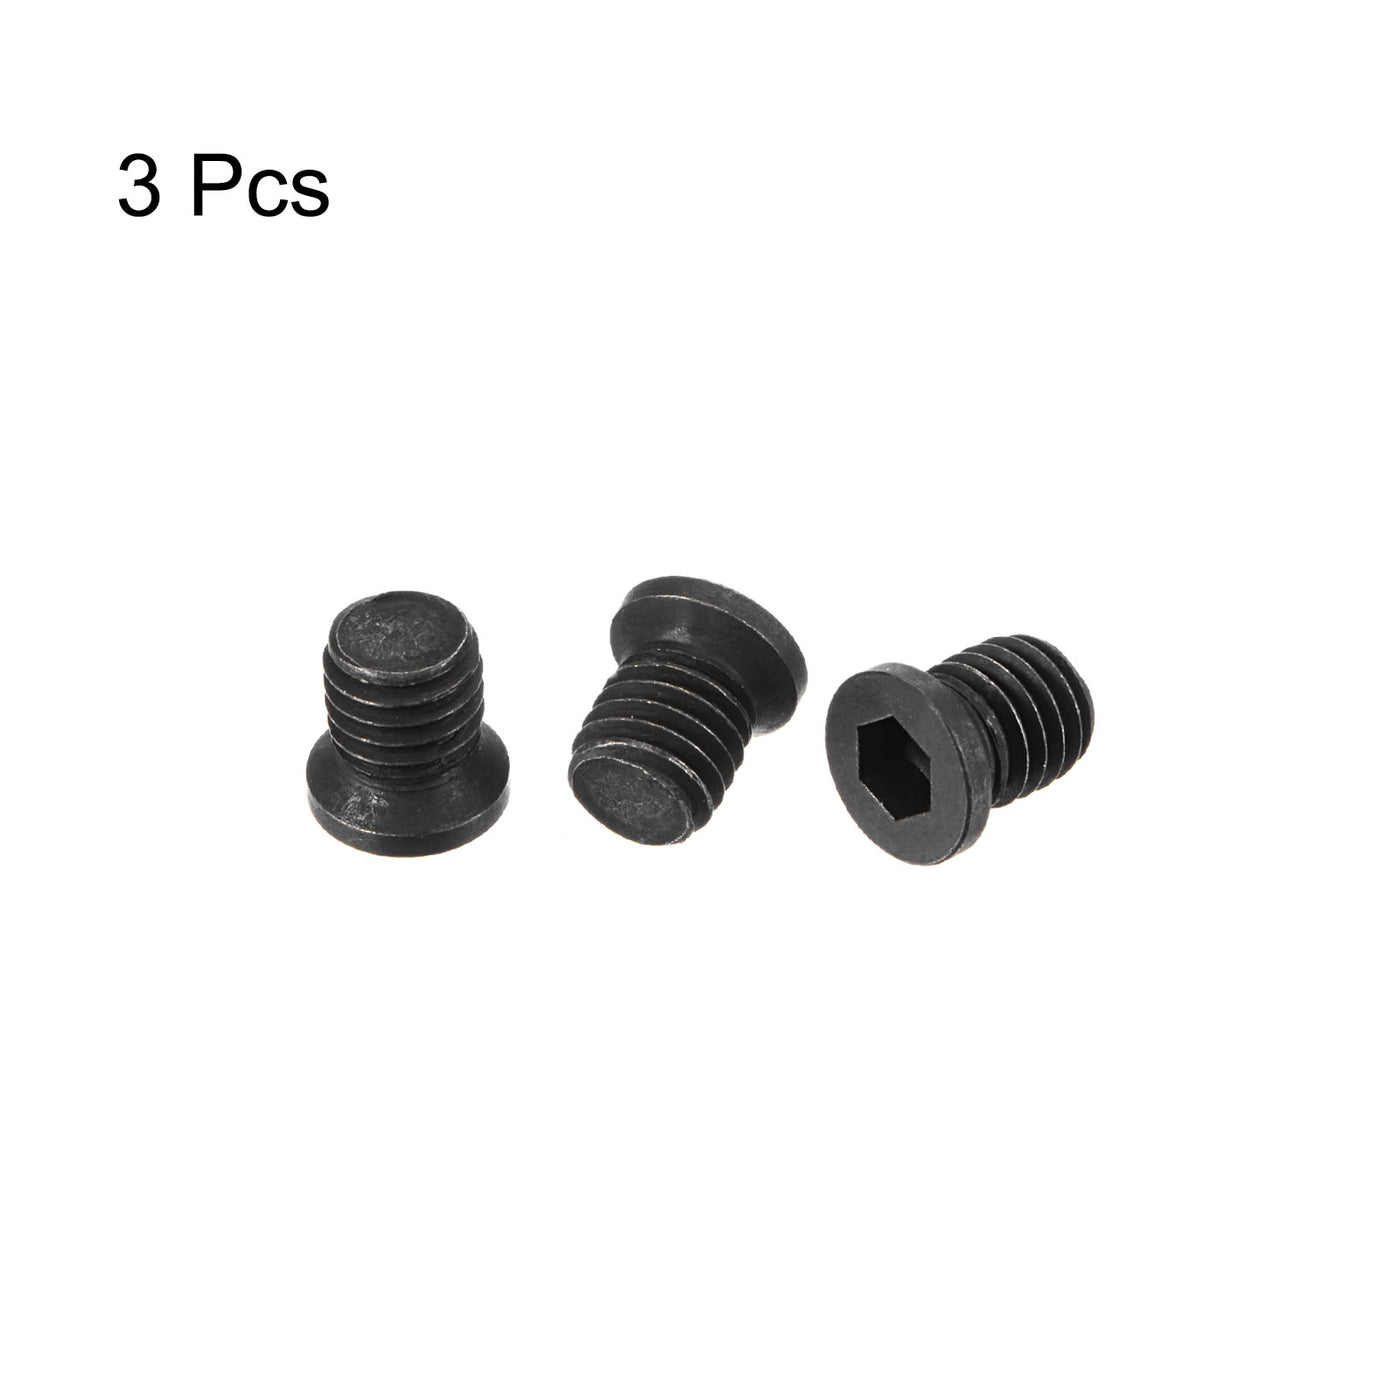 Uxcell Uxcell M8x10.5-1.25 Set Screws for Carbide CNC Lathe Turning Tool, 3Pcs